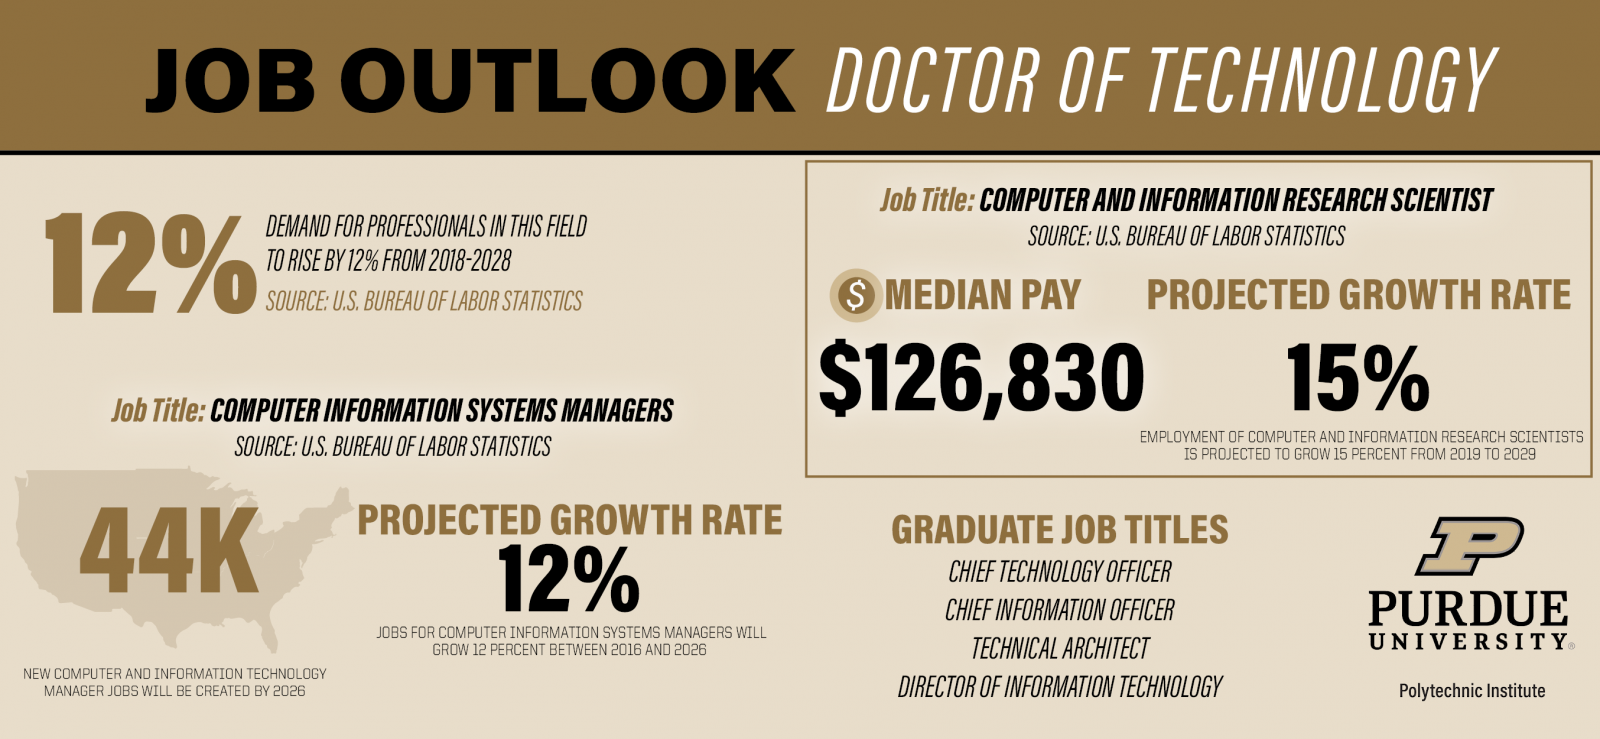 Job Outlook Information - Doctor of Technology